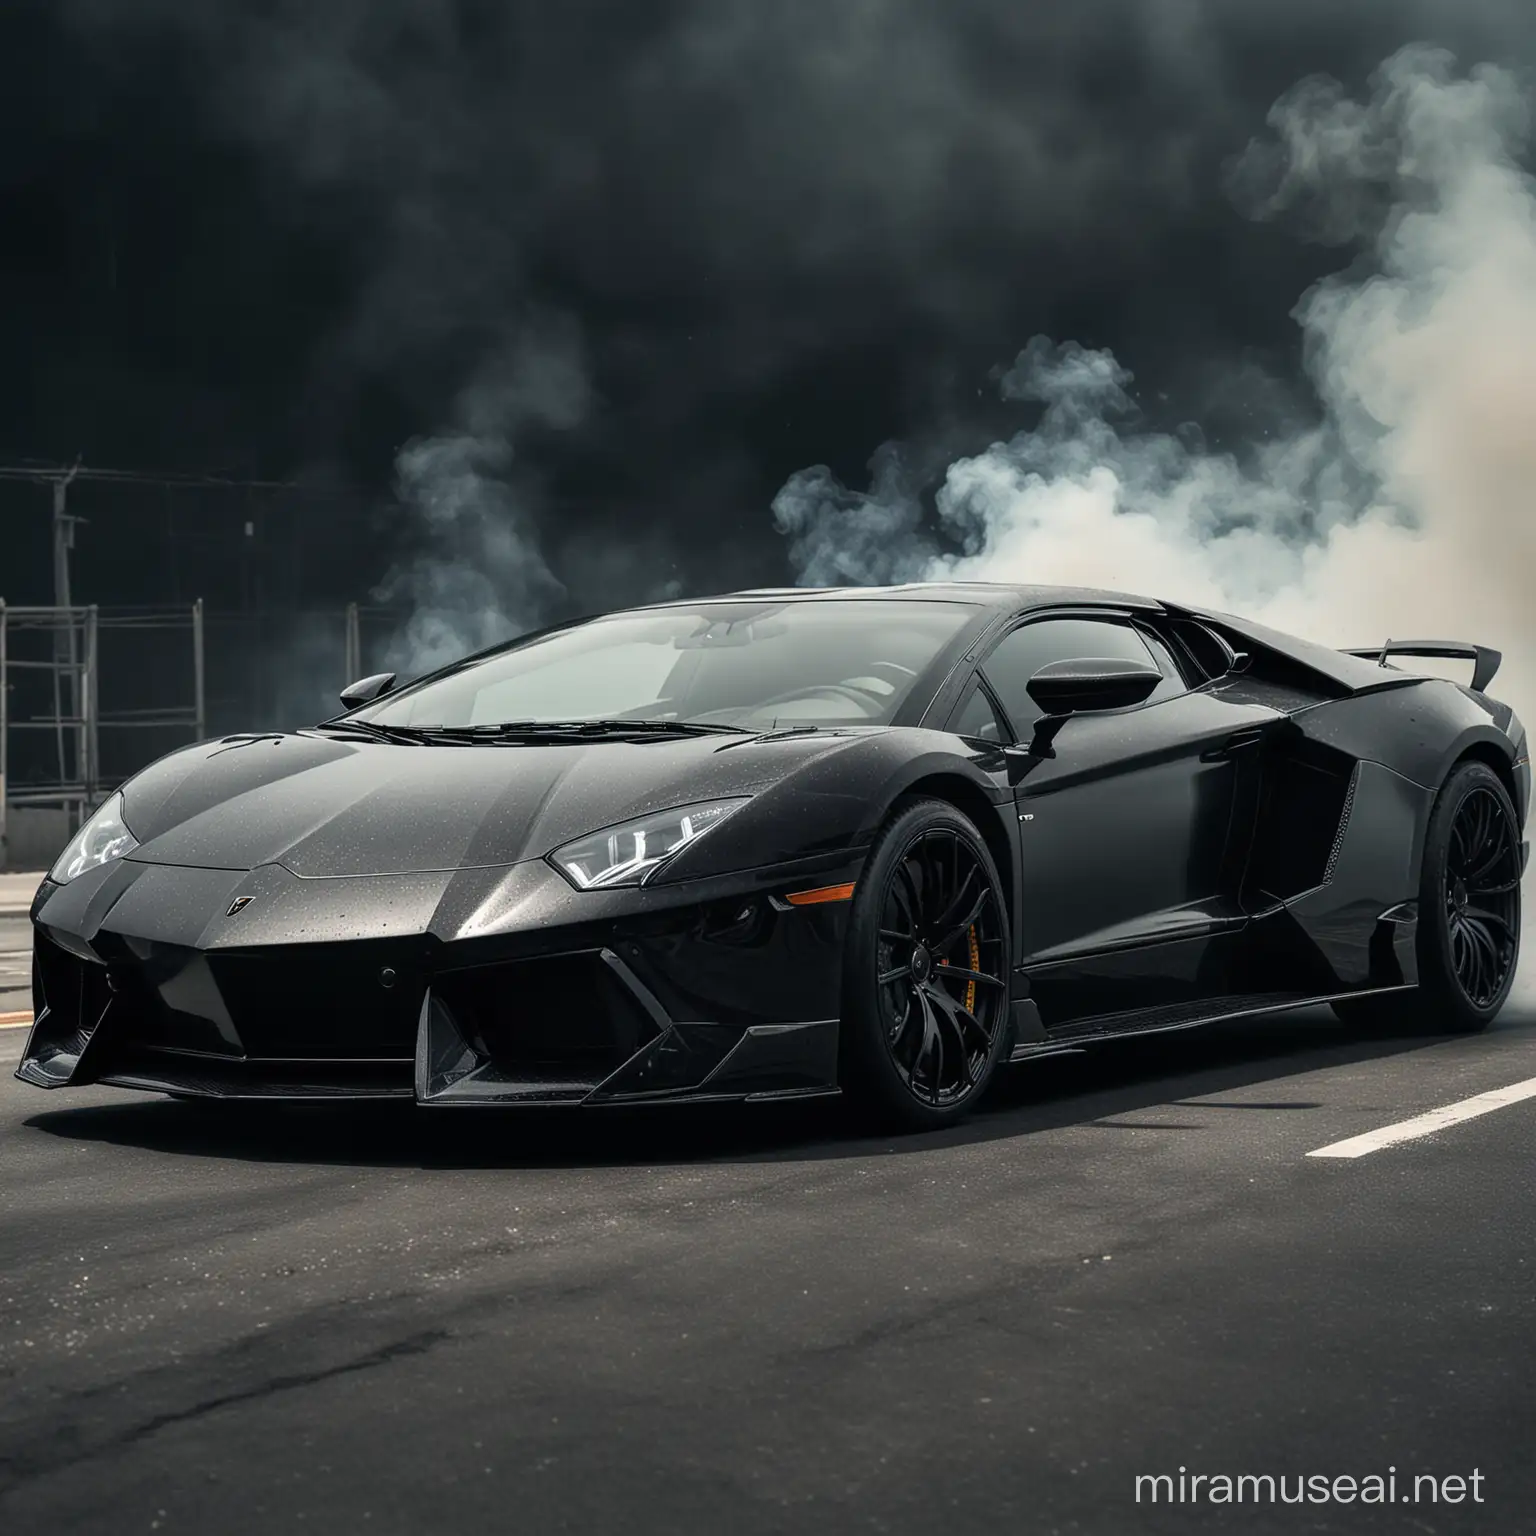 Luxurious Black Lamborghini 8K with Smoky Tint in High Resolution